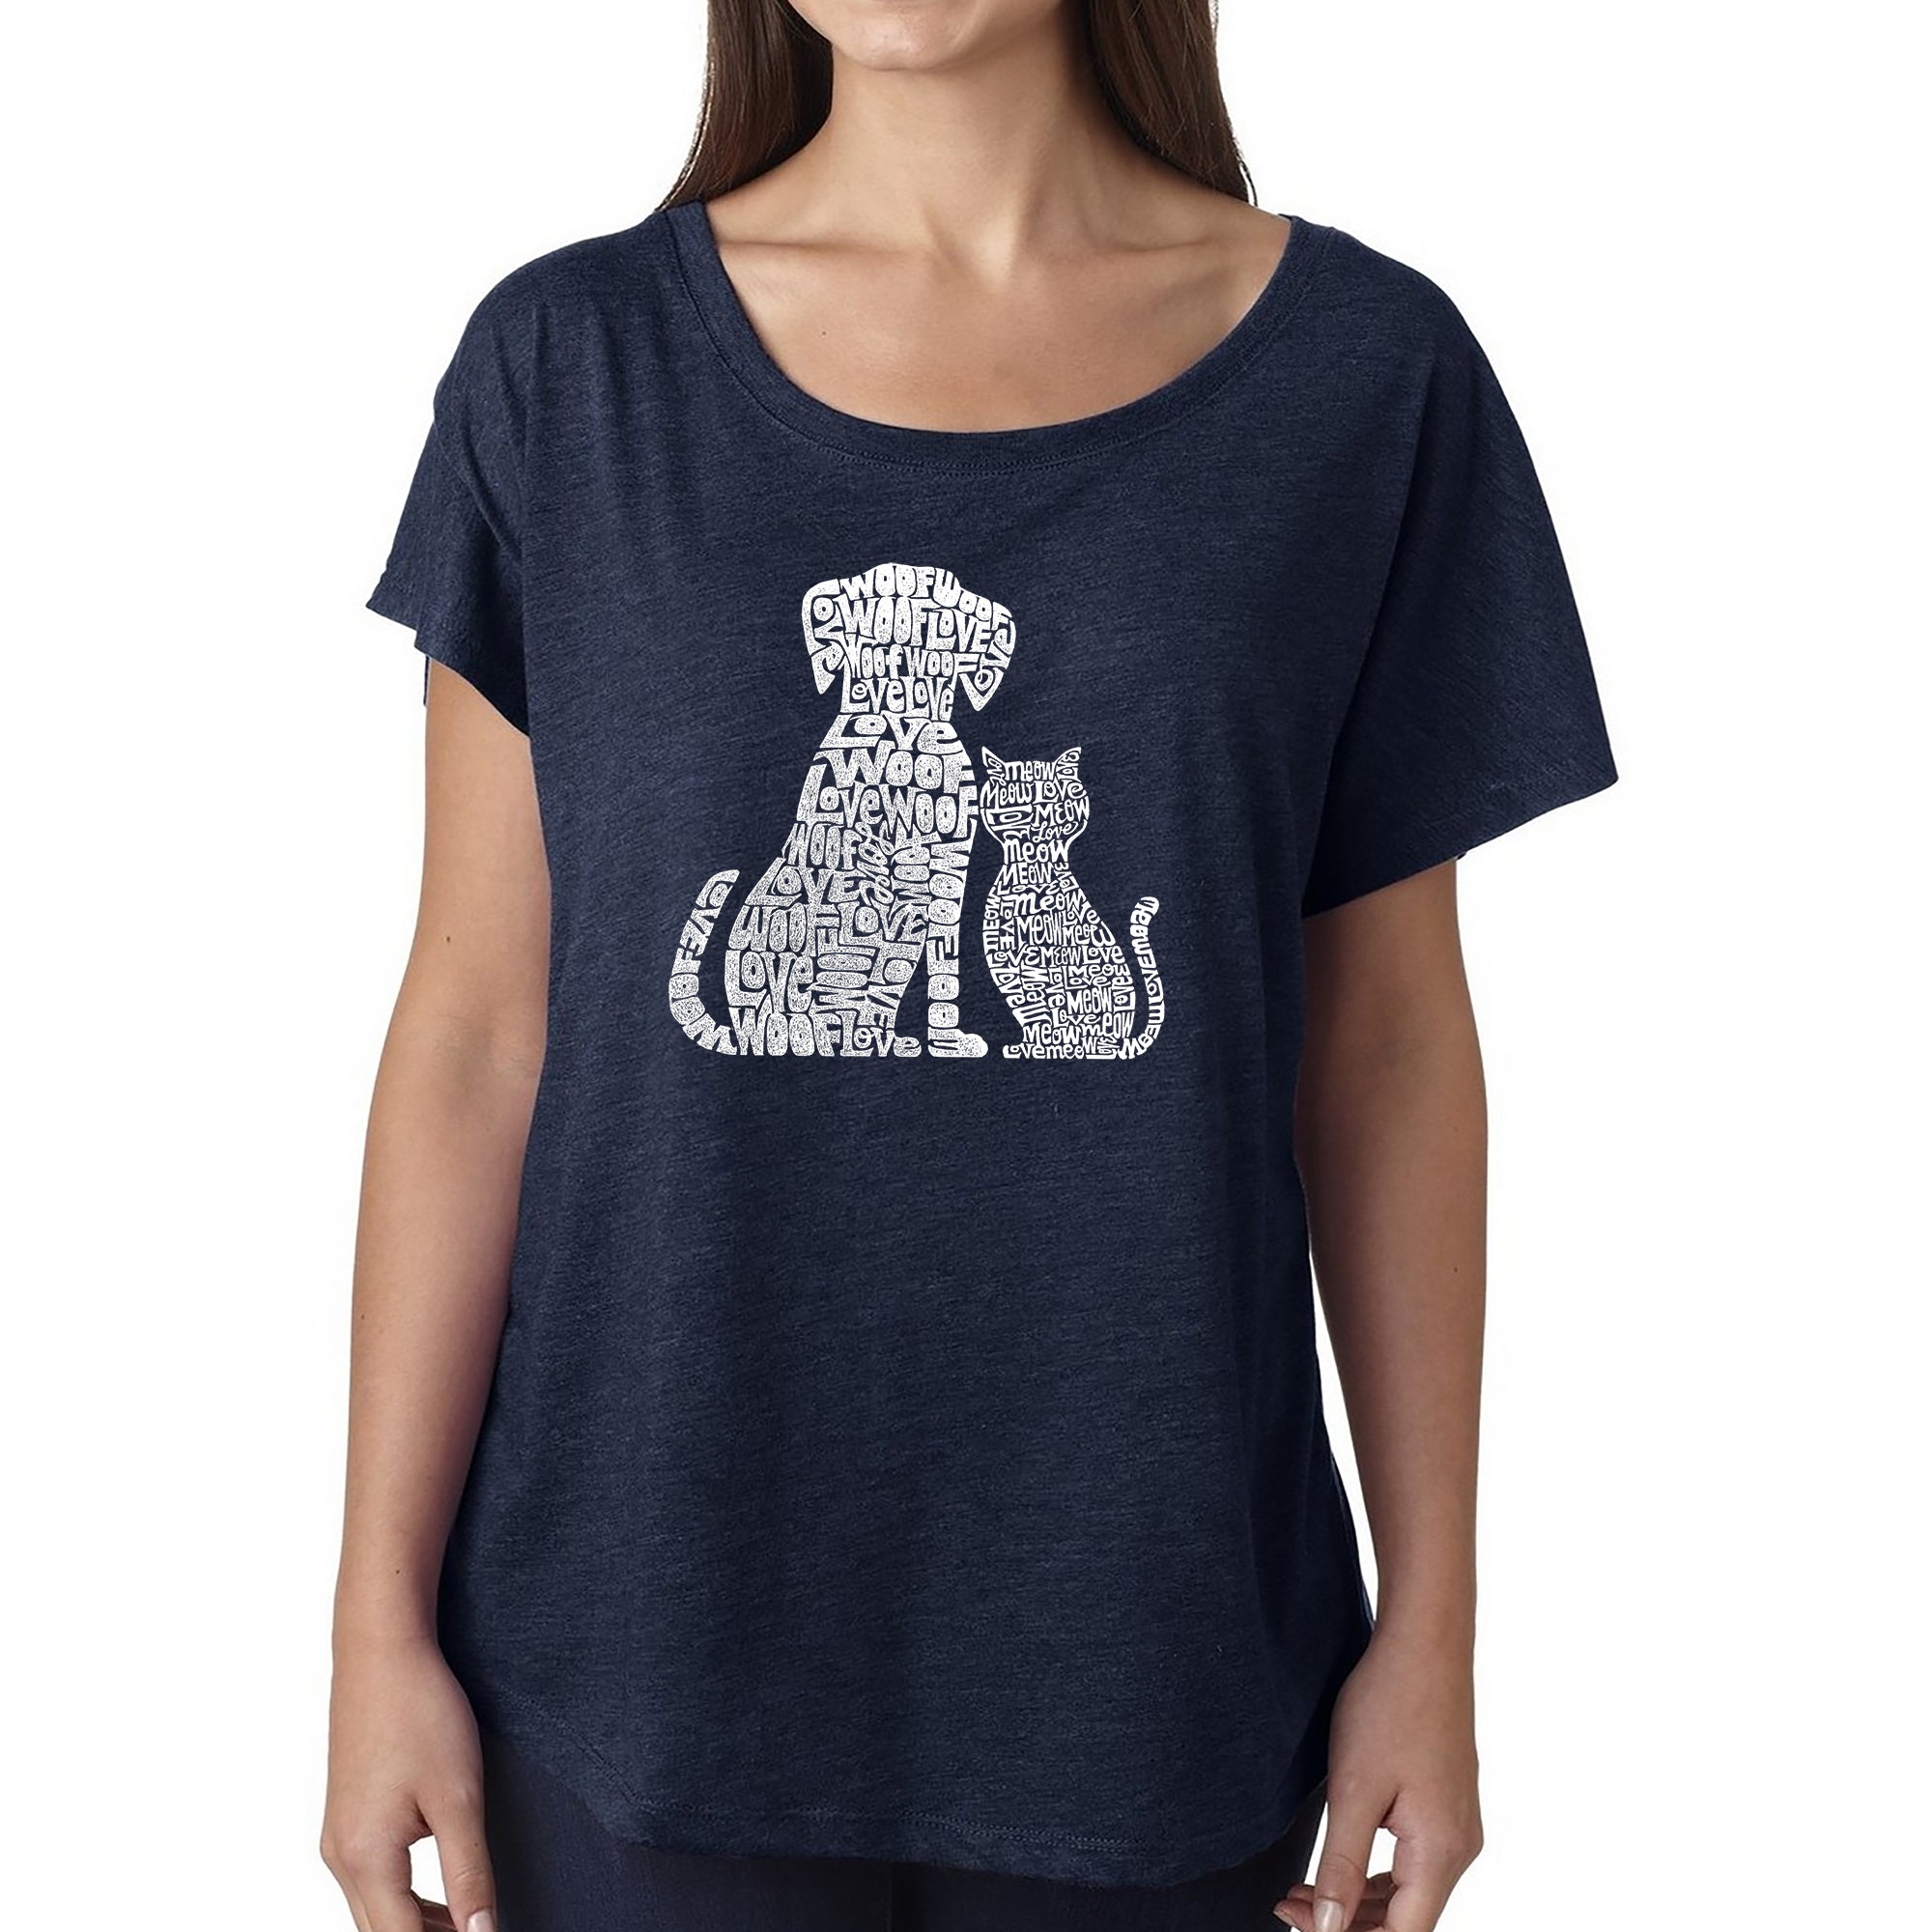 Dogs And Cats - Women's Loose Fit Dolman Cut Word Art Shirt - Navy - Small